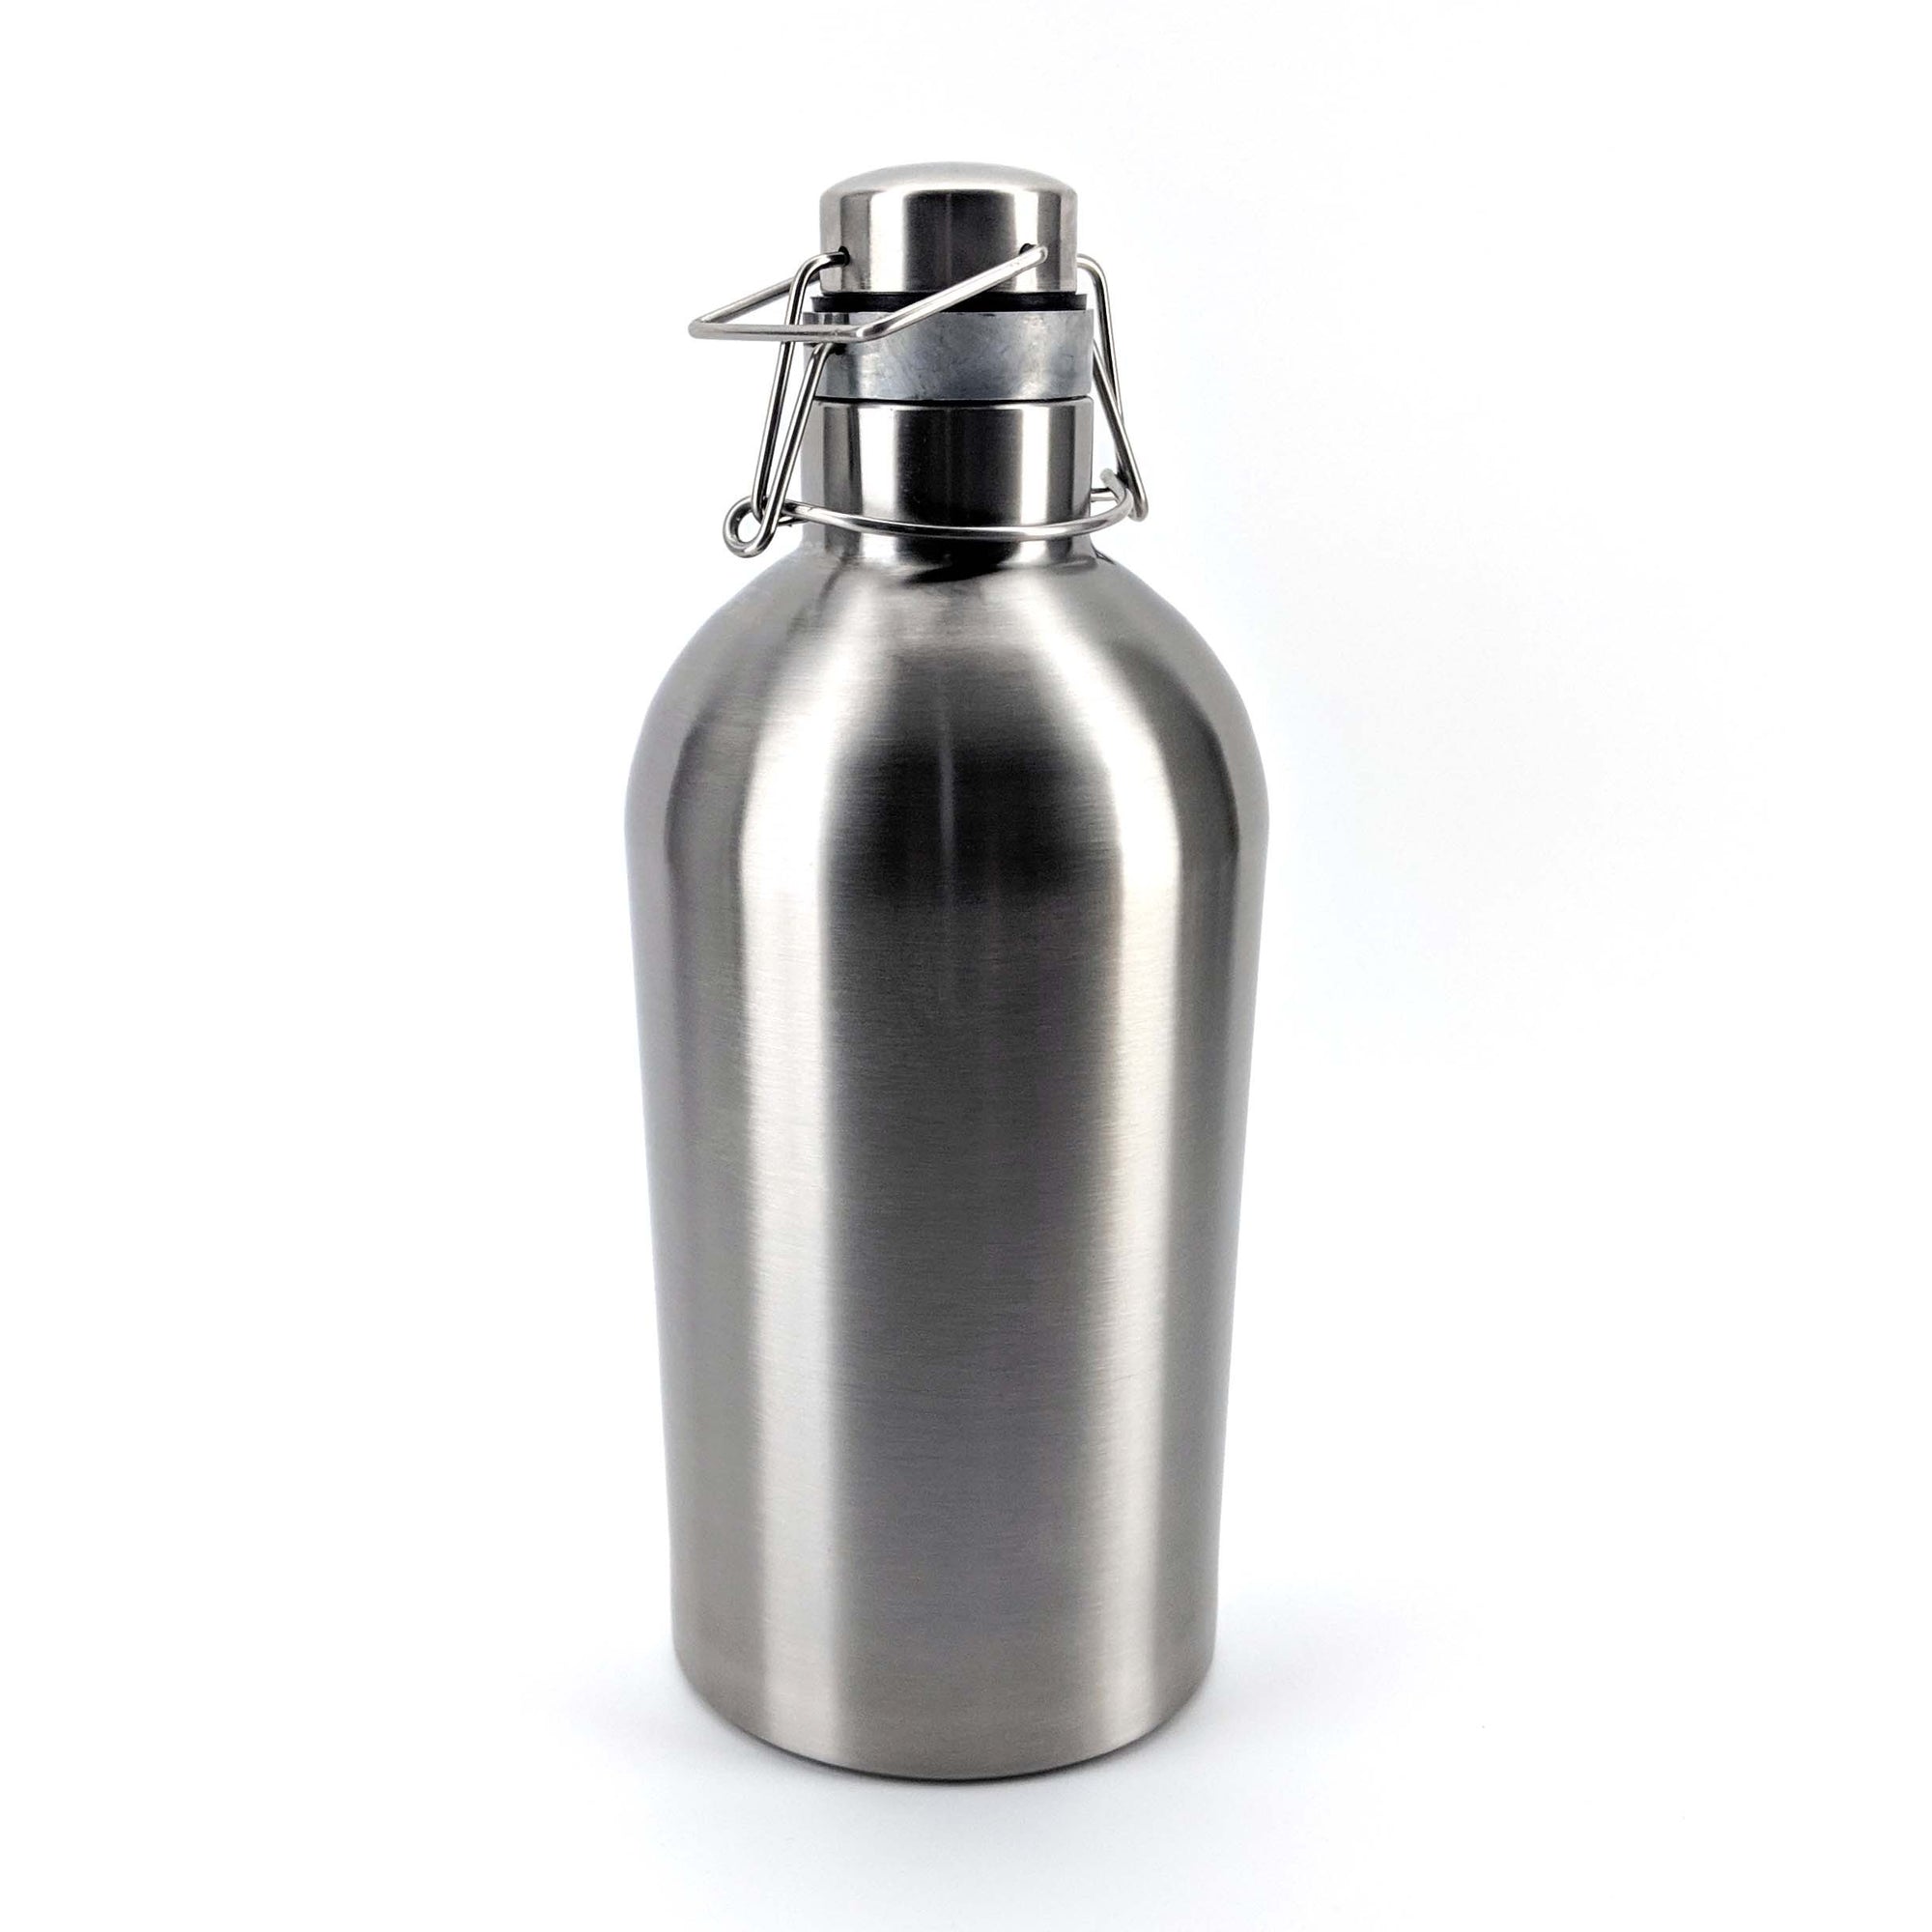 The Ultimate Beer Growler - All Things Fermented | Home Brew Shop NZ | Supplies | Equipment